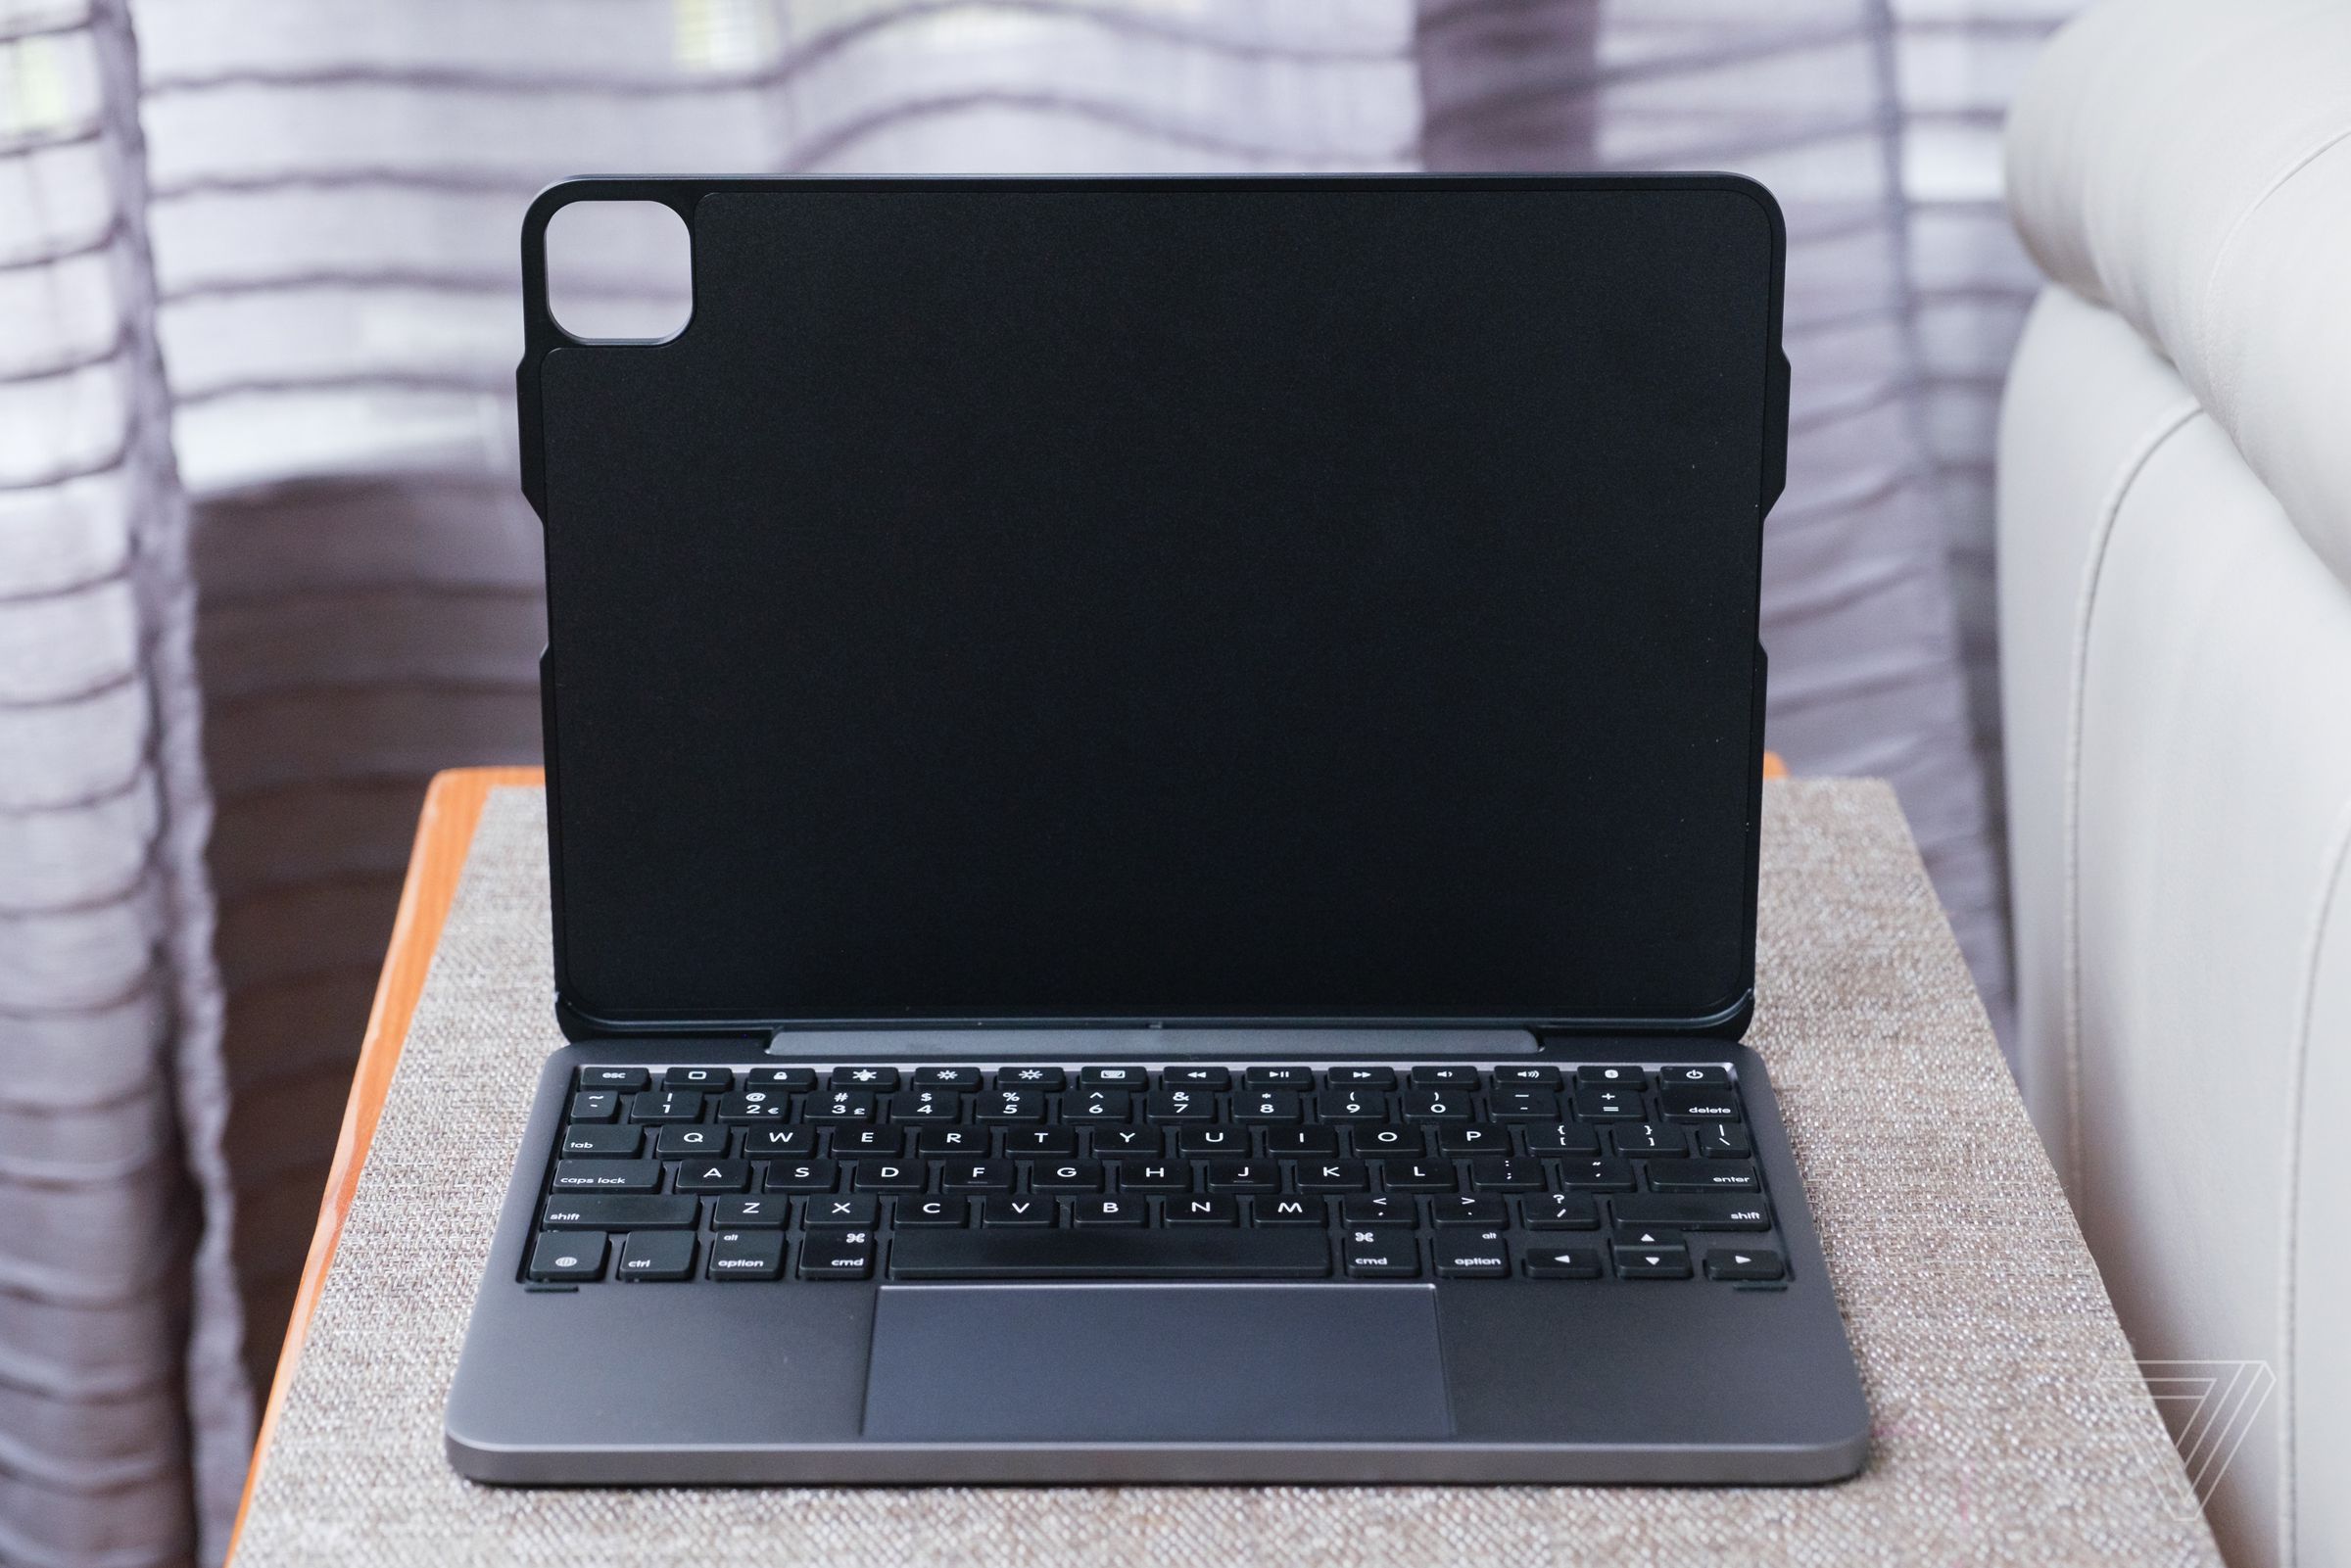 The 11 Max Plus connects to the iPad’s built-in magnets to hold it in place.